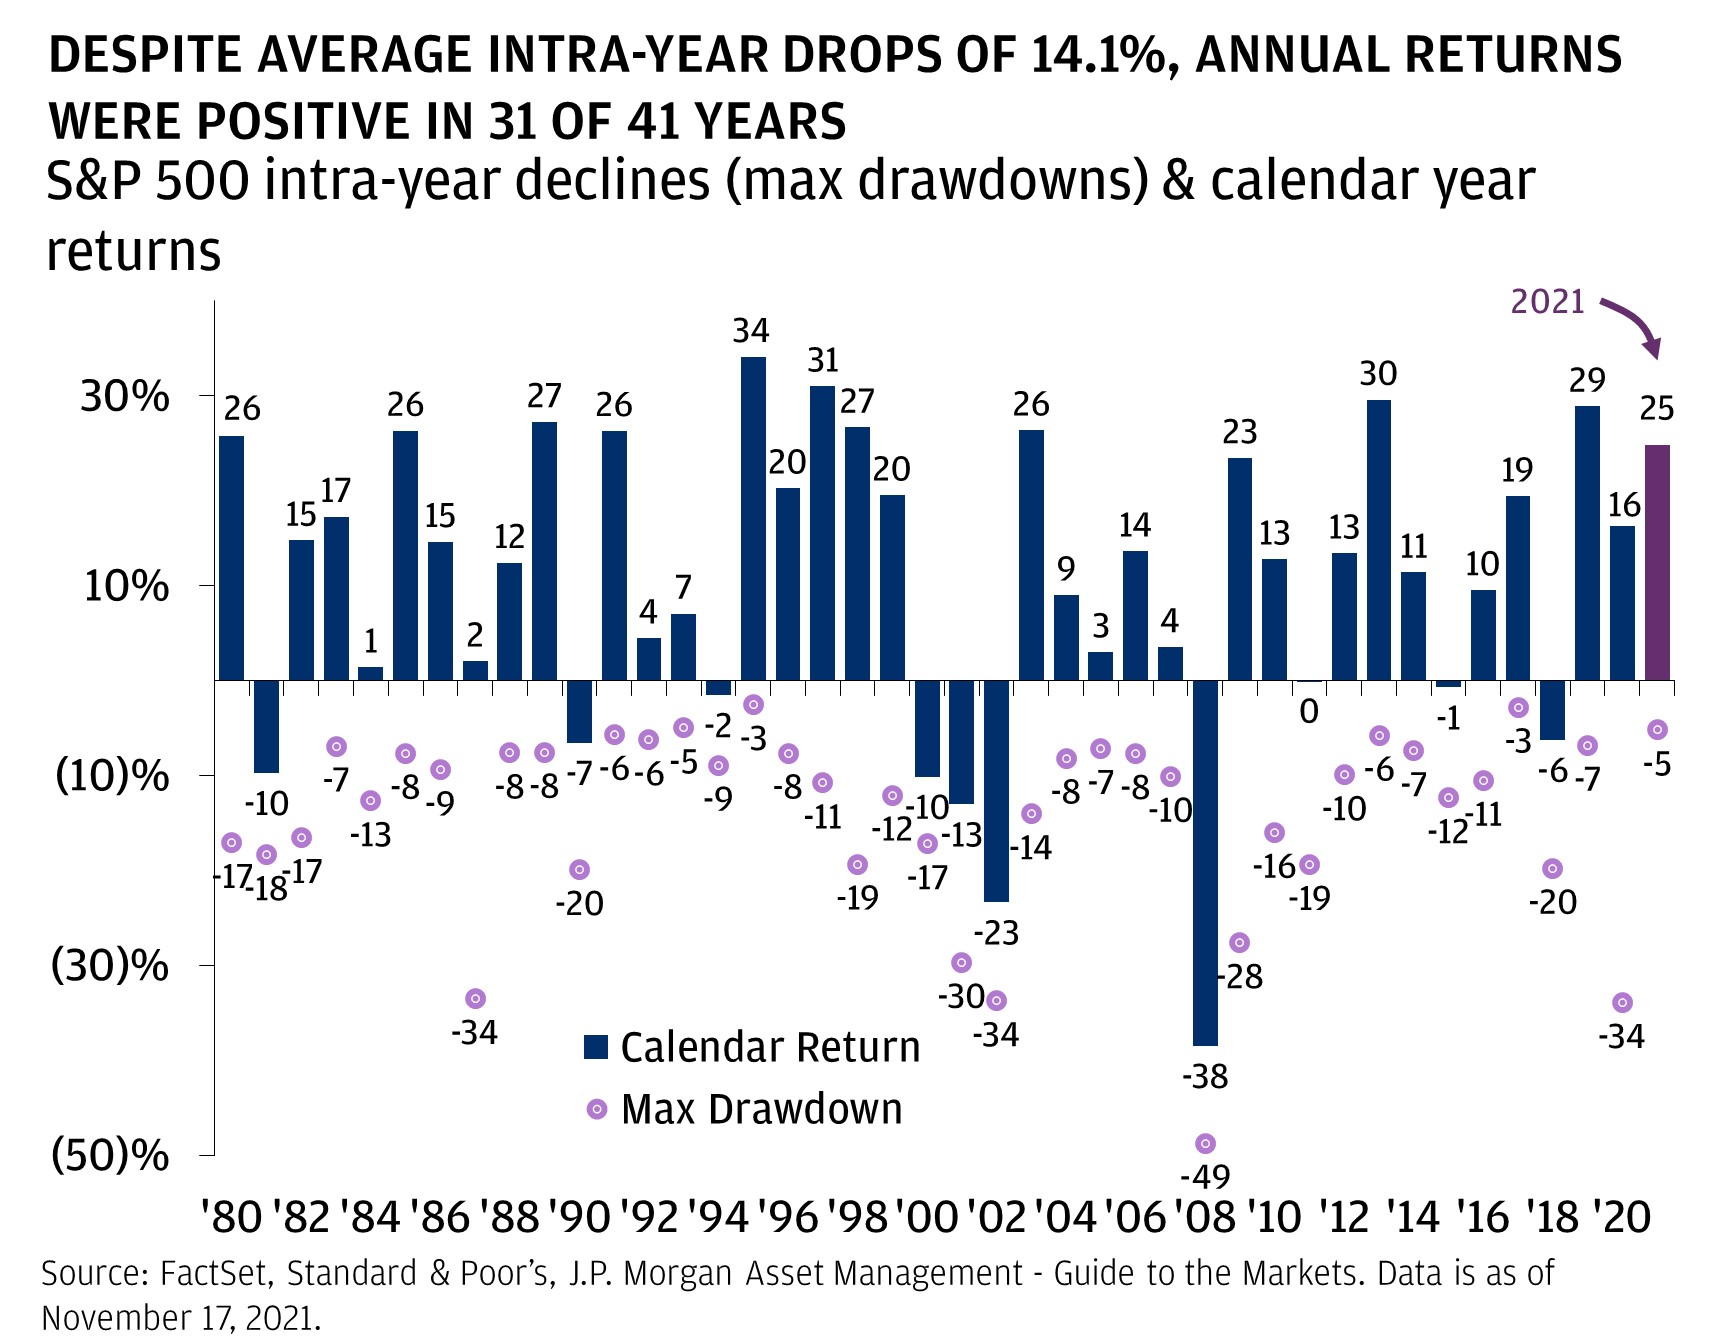 This chart shows the S&P 500 calendar year returns and maximum intra-year drawdowns from 1980 to 2021. In 1980, the full-year return was 26% and the maximum intra-year drawdown was -17%. In 1981, -10% and -18%, respectively. In 1982, 15% and -17%. In 1983, 17% and -7%. In 1984, 1% and -13%. In 1985, 26% and -8%. In 1986, 15% and -9%. In 1987, 2% and -34%. In 1988, 12% and -8%. In 1989, 27% and -8%. In 1990, -7% and -20%. In 1991, 26% and -6%. In 1992, 4% and -6%. In 1993, 7% and -5%. In 1994, -2% and -9%. In 1995, 3% and -3%. In 1996, 20% and -8%. In 1997, 31% and -11%. In 1998, 27% and -19%. In 1999, 20% and -12%. In 2000, -10% and -17%. In 2001, -13% and -30%. In 2002, -23% and -34. In 2003, 26% and -14%. In 2004, 9% and -8%. In 2005, 3% and -7%. In 2006, 14% and -8%. In 2007, 4% and -10%. In 2008, -38% and -49%, all-time lows. In 2009, 23% and -28%. In 2010, 13% and -16%. In 2011, 0% and -19%. In 2012, 13% and -10%. In 2013, 30% and -6%. In 2014, 11% and -7%. In 2015, -1% and -12%. In 2016, 10% and -11%. In 2017, 19% and -3%. In 2018, -6% and -20%. In 2019, 29% and -7%. In 2020, 16% and -34%. Finally, in 2021, 25% and -5%.